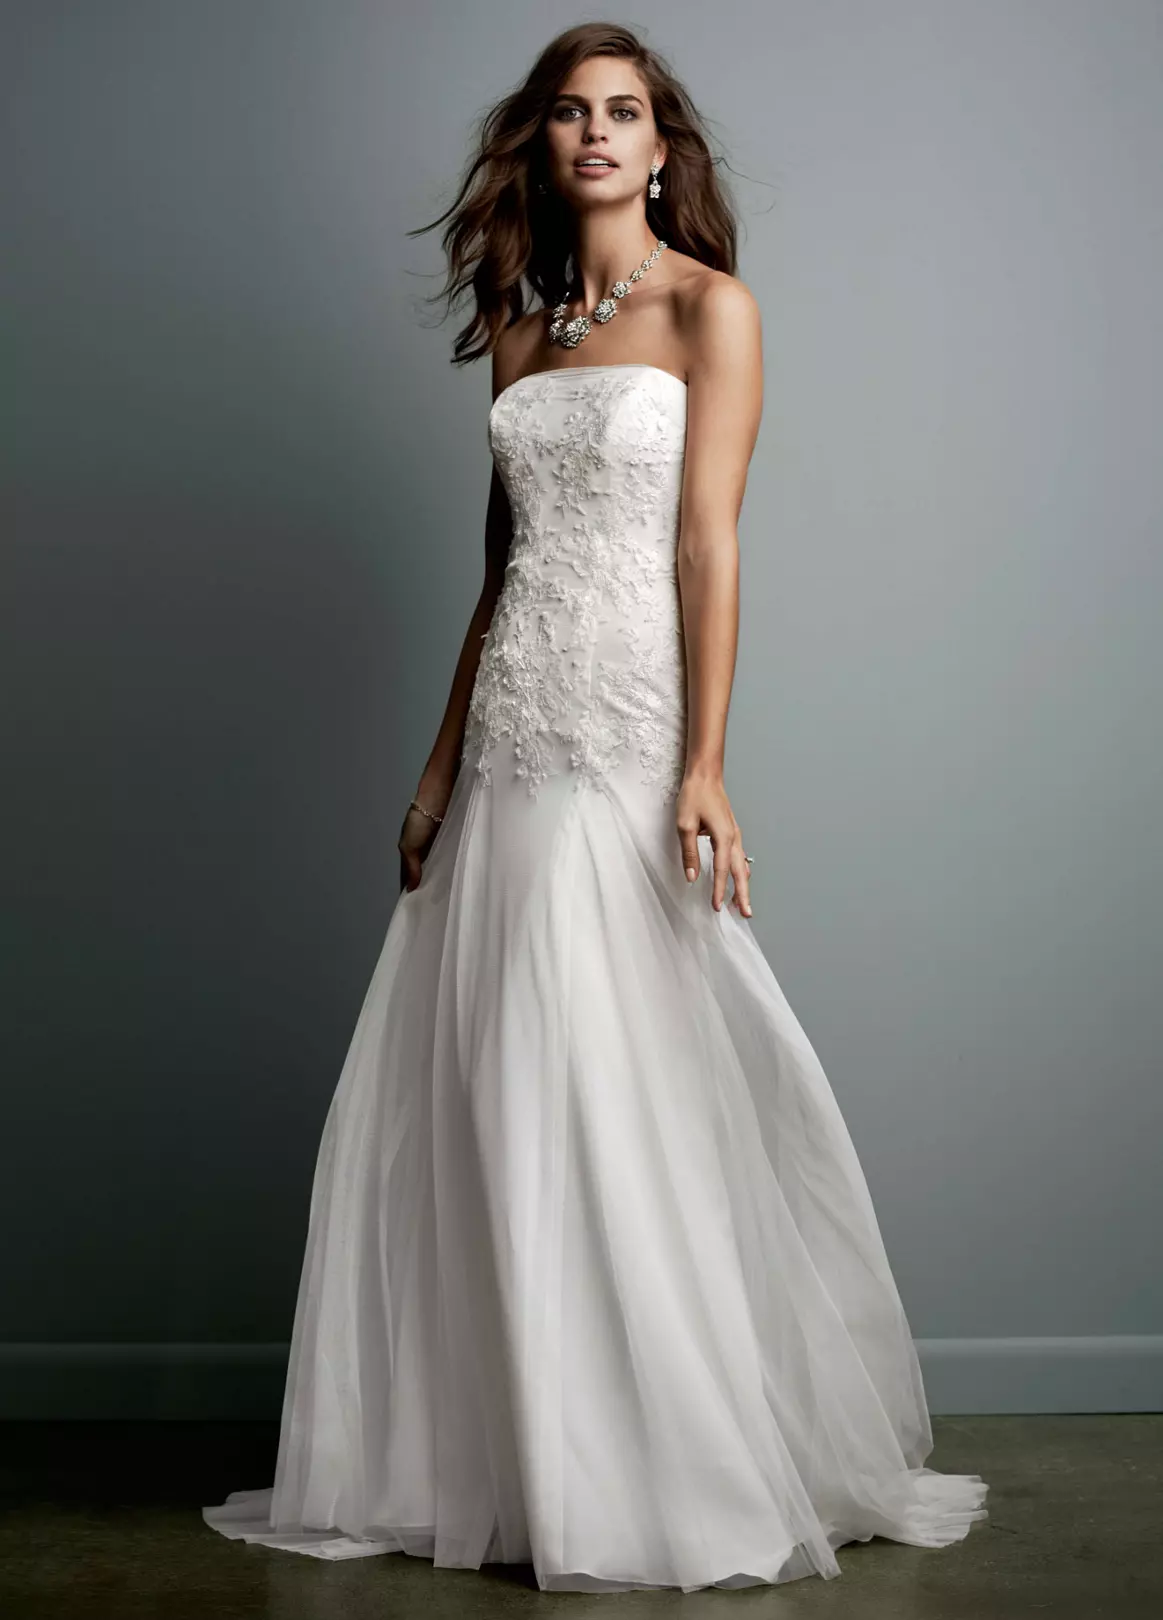 Strapless Tulle Wedding Gown with Lace Embroidery Image